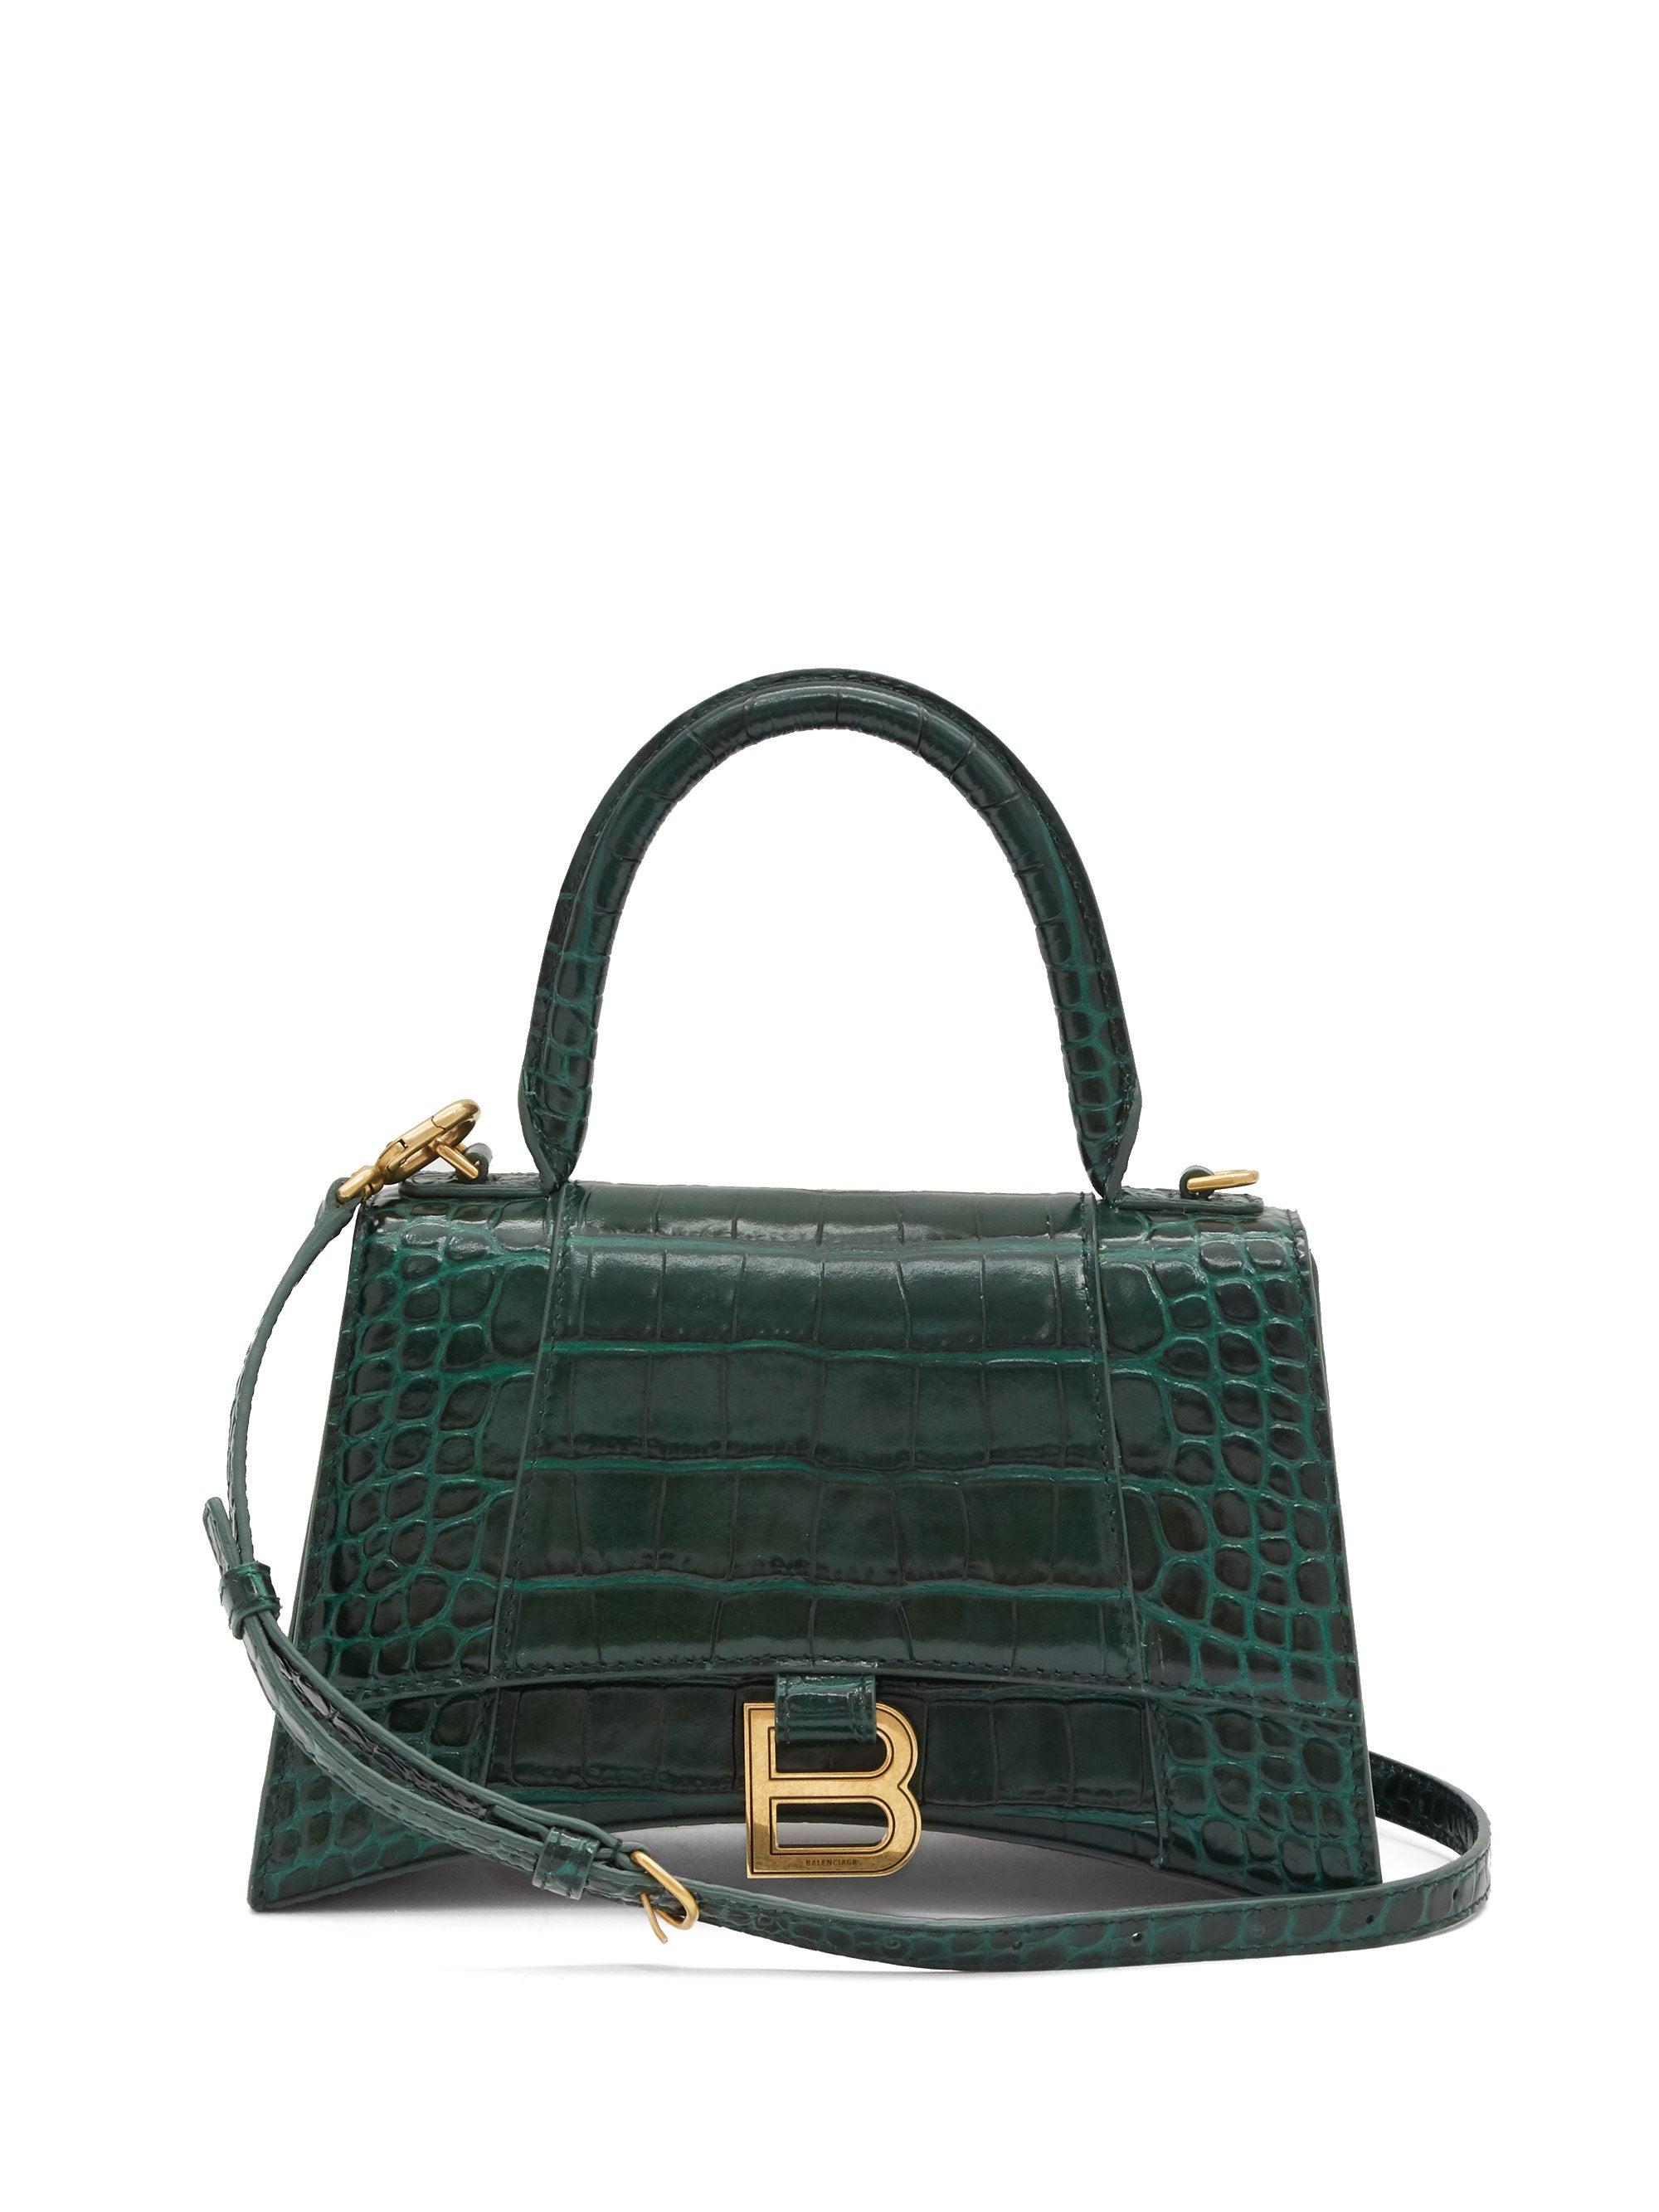 Balenciaga Small Hourglass Top Handle Bag In Croc-embossed Calfskin in Green  | Lyst